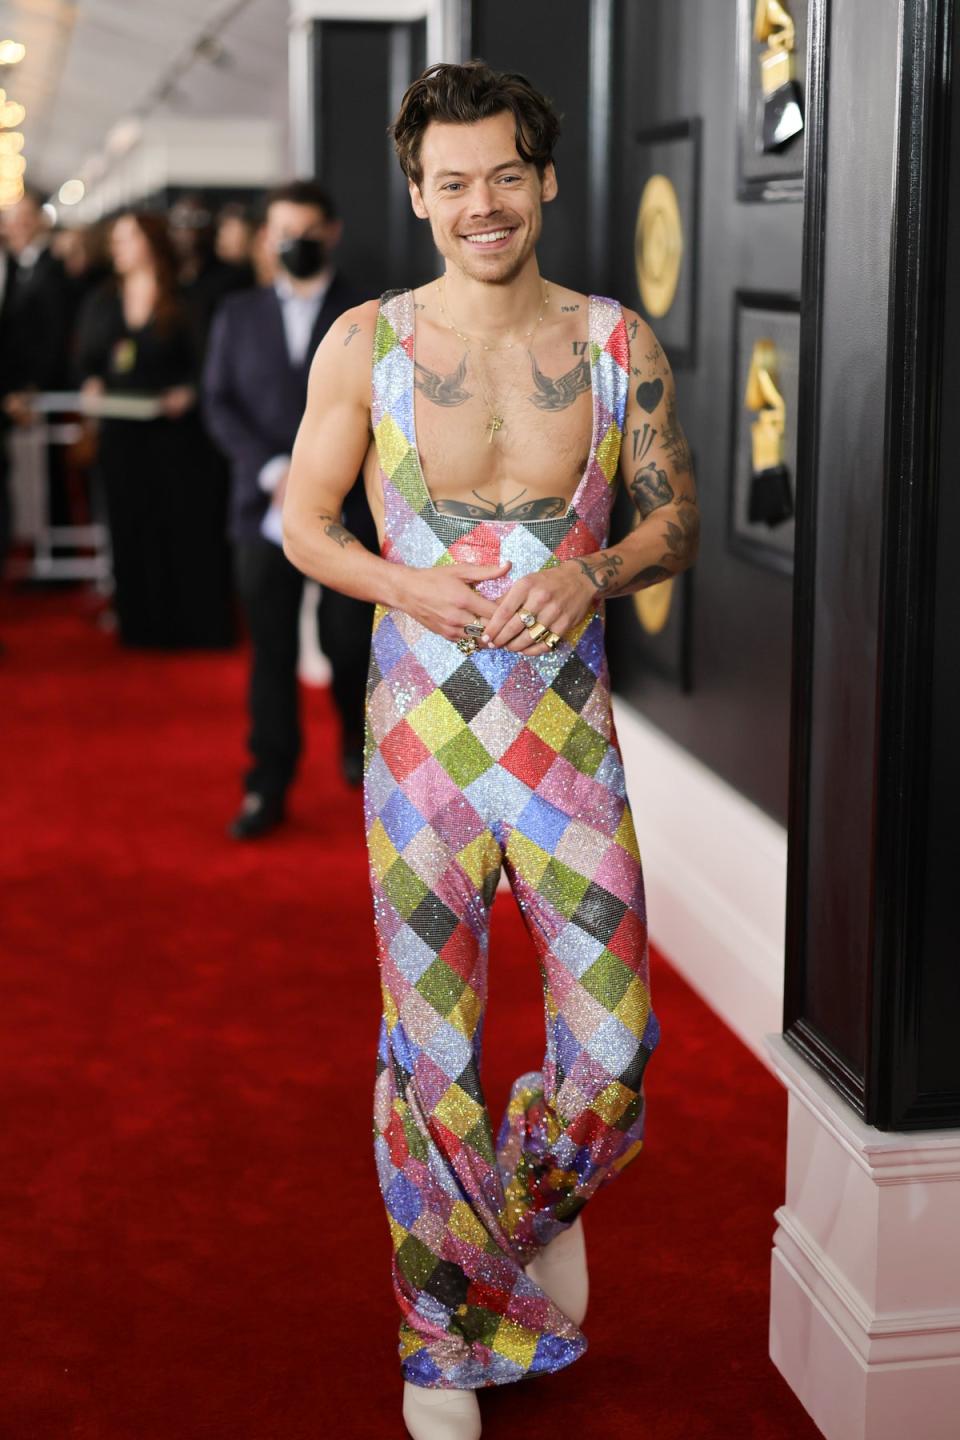 Harry Styles wears Swarovski-encrusted jumpsuit designed by EgonLab (Getty Images for The Recording A)